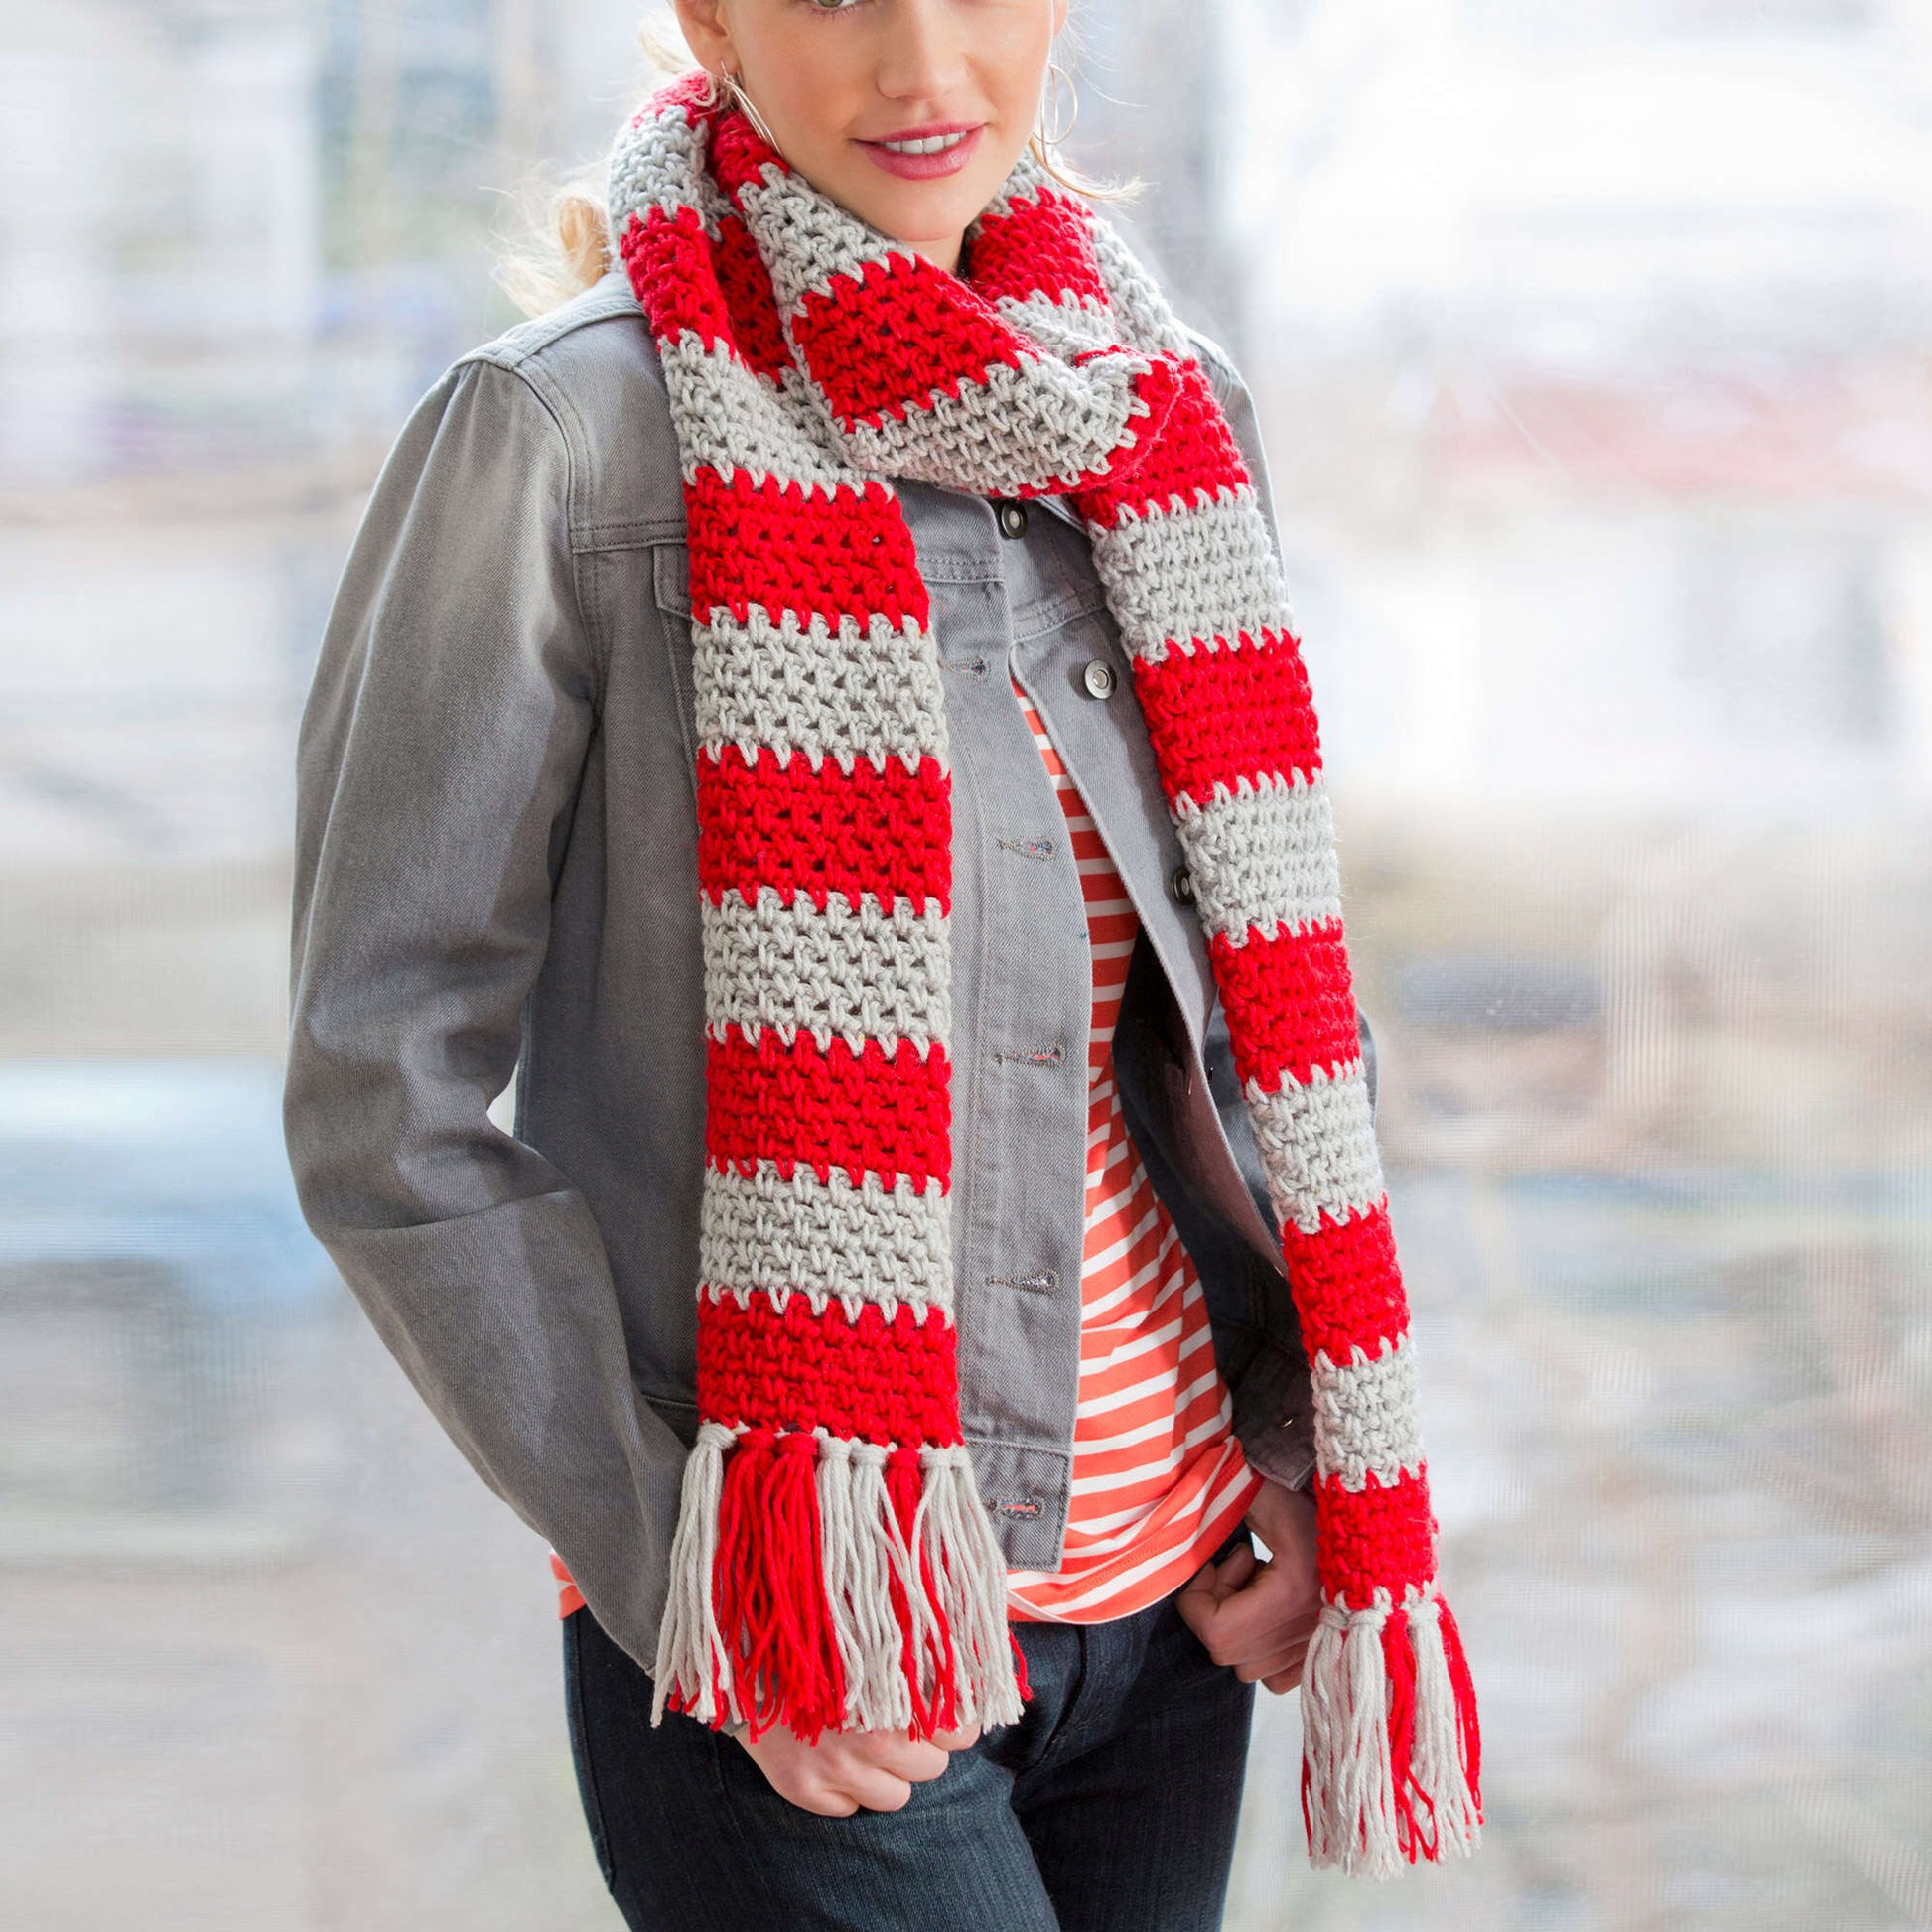 Free Red Heart My Team Forever Scarf Pattern